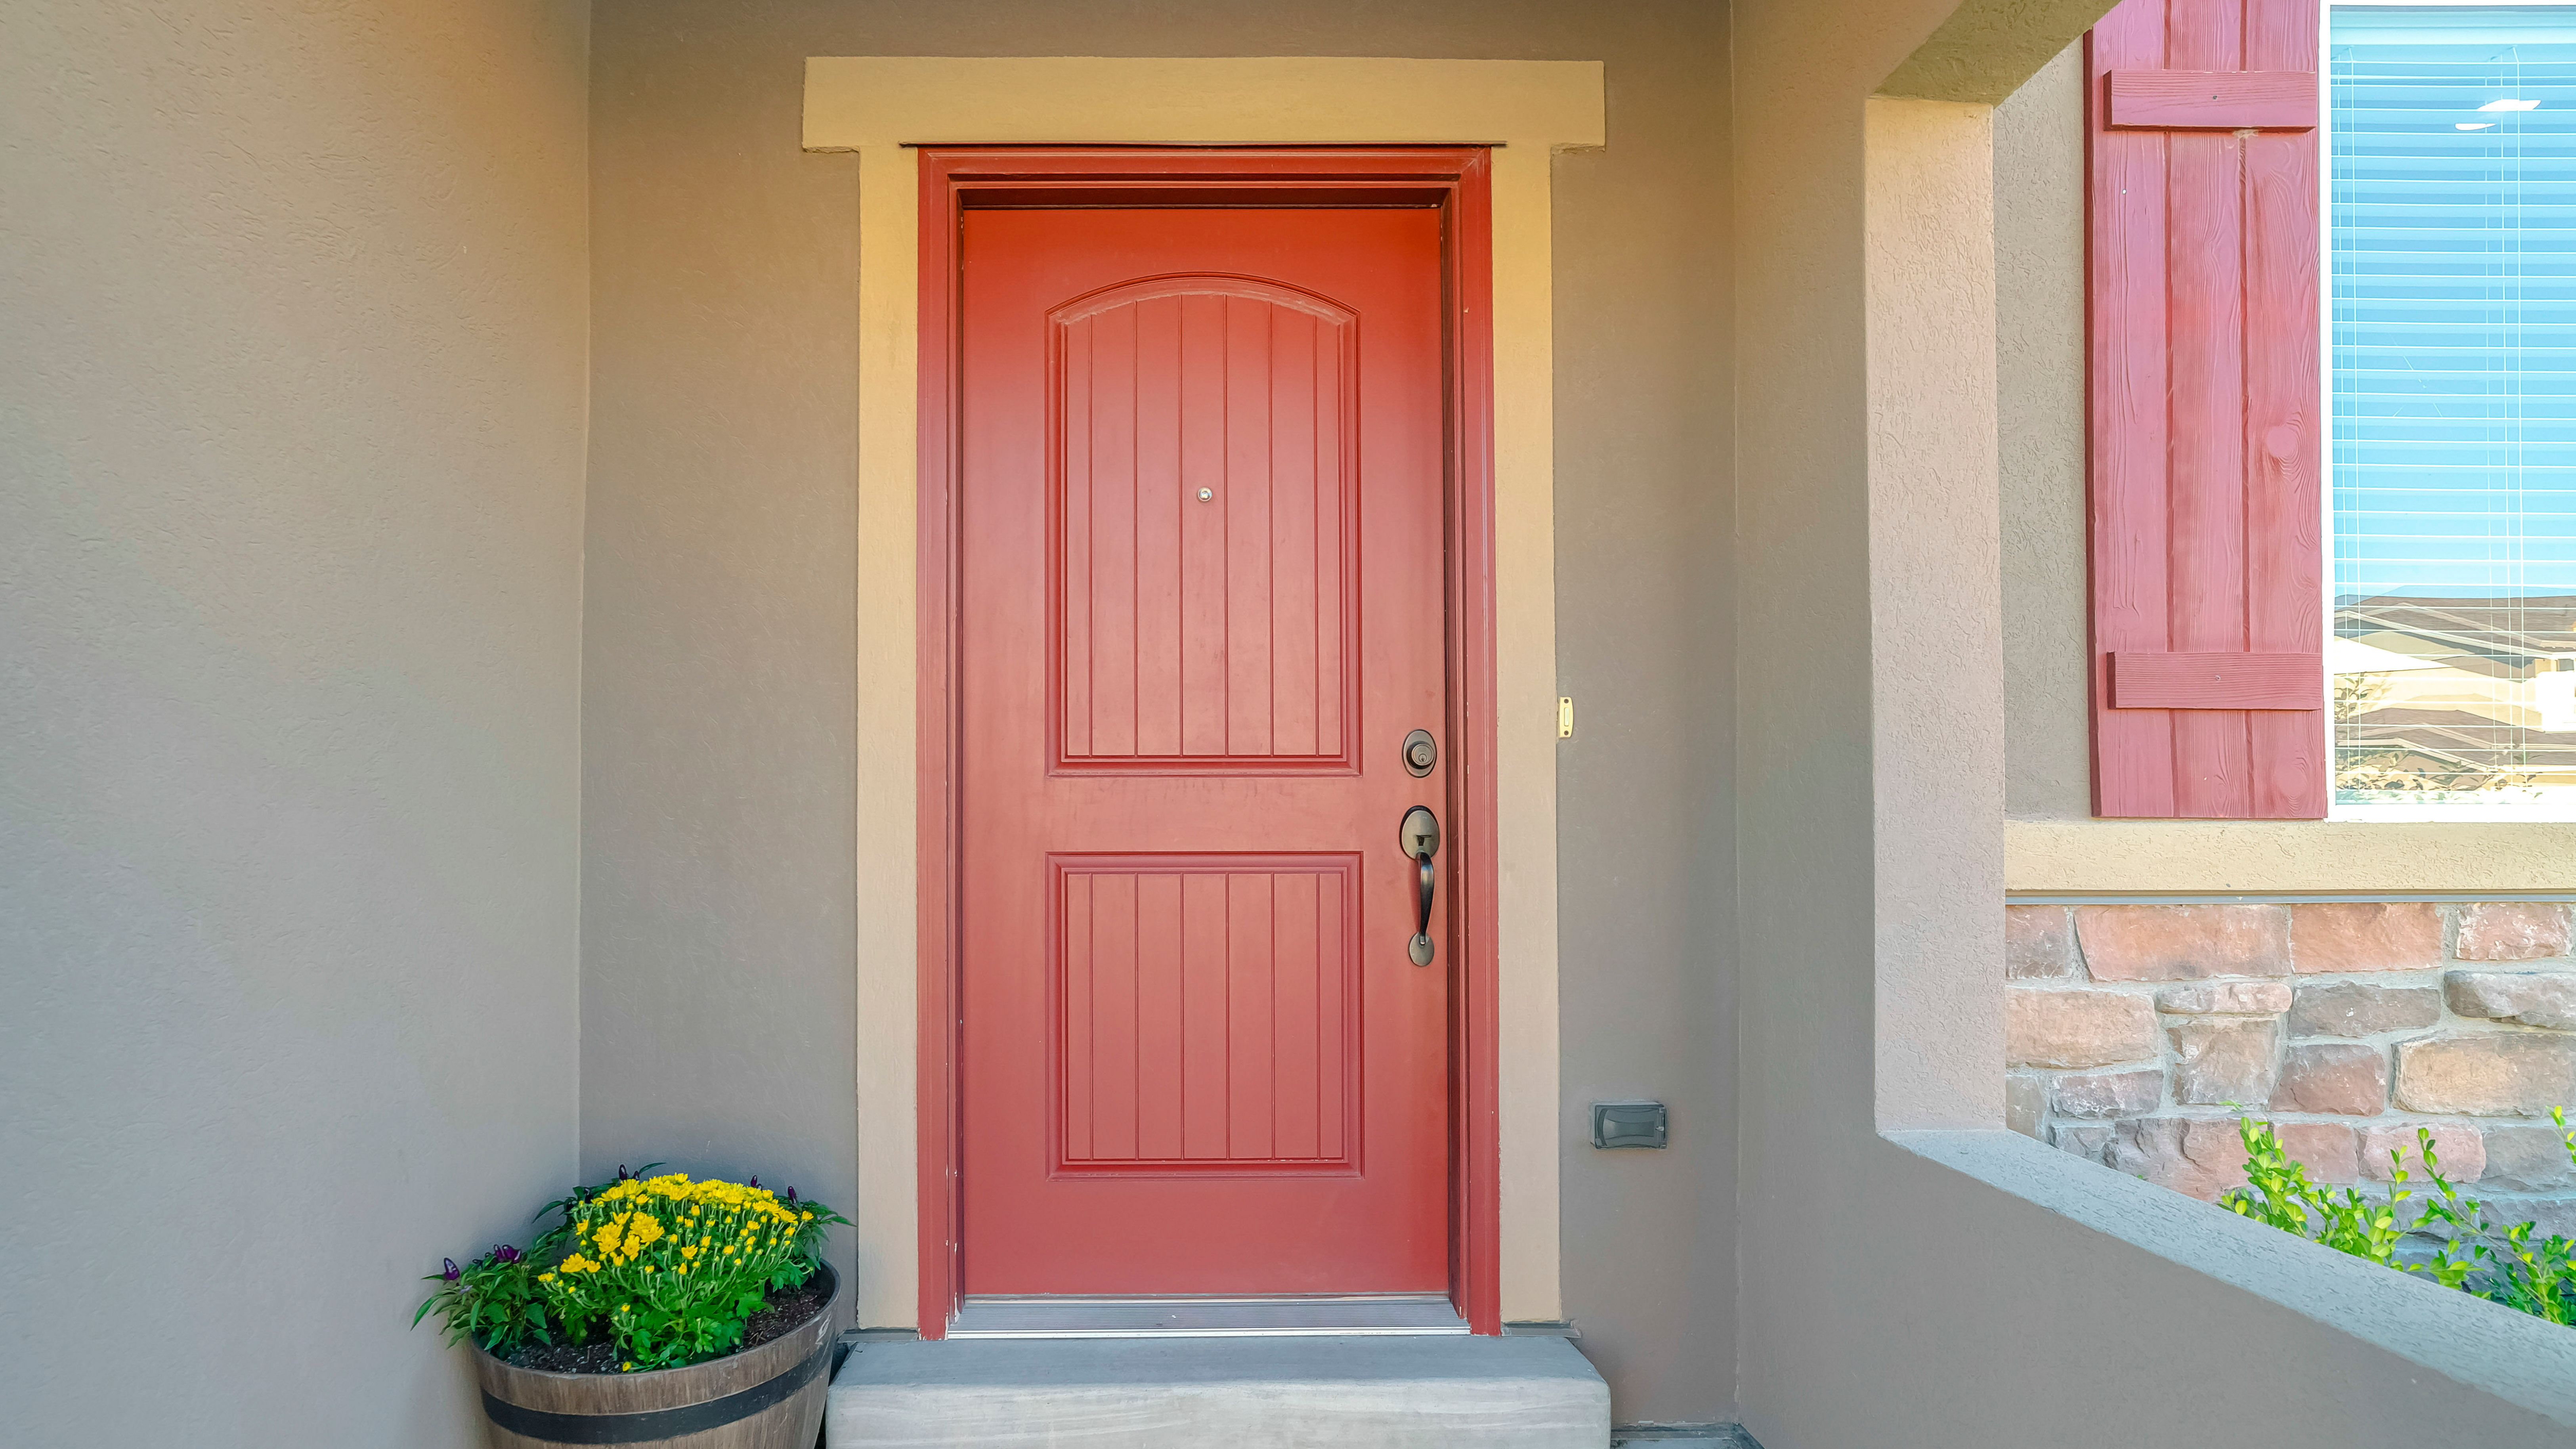 A vibrant coral-colored exterior door with a decorative window shutter beside it, set in a beige wall with a stone base.